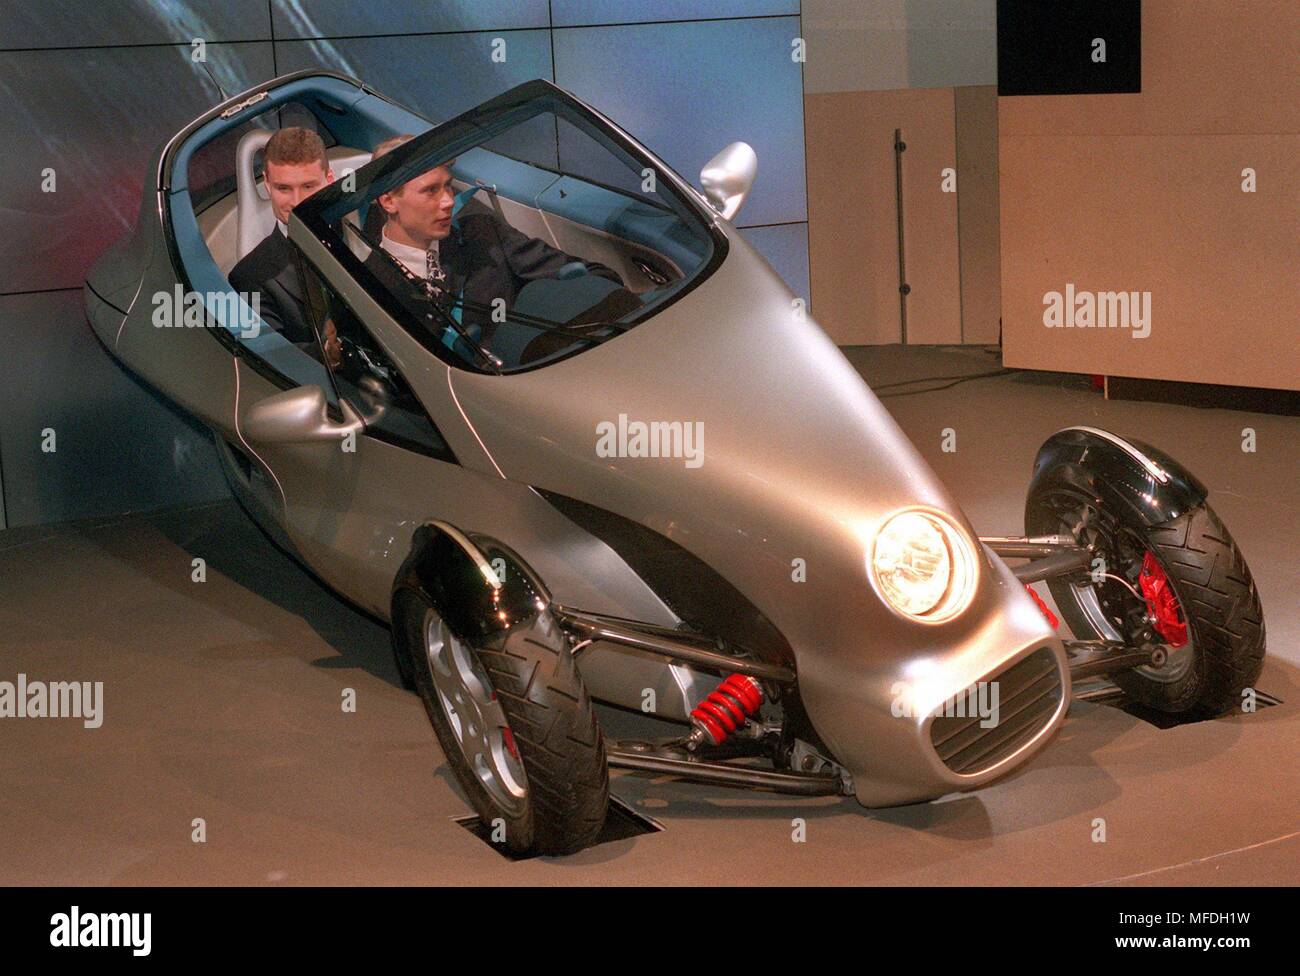 In the run-up to the International Motor Show (IAA), the two Formula 1 drivers Mika Hakkinen (front) and David Coulthard present a tricycle of the Daimler Benz Group. The research vehicle 'F 300 Life Jet' with two wheels in the front and a wheel at the back, is to combine the view of Mercedes motorcycle driving experience with the comfort of a car. The study with a 102 hp engine accelerates from zero to one hundred in 7.7 seconds and reaches a top speed of 211 km/h. | usage worldwide Stock Photo